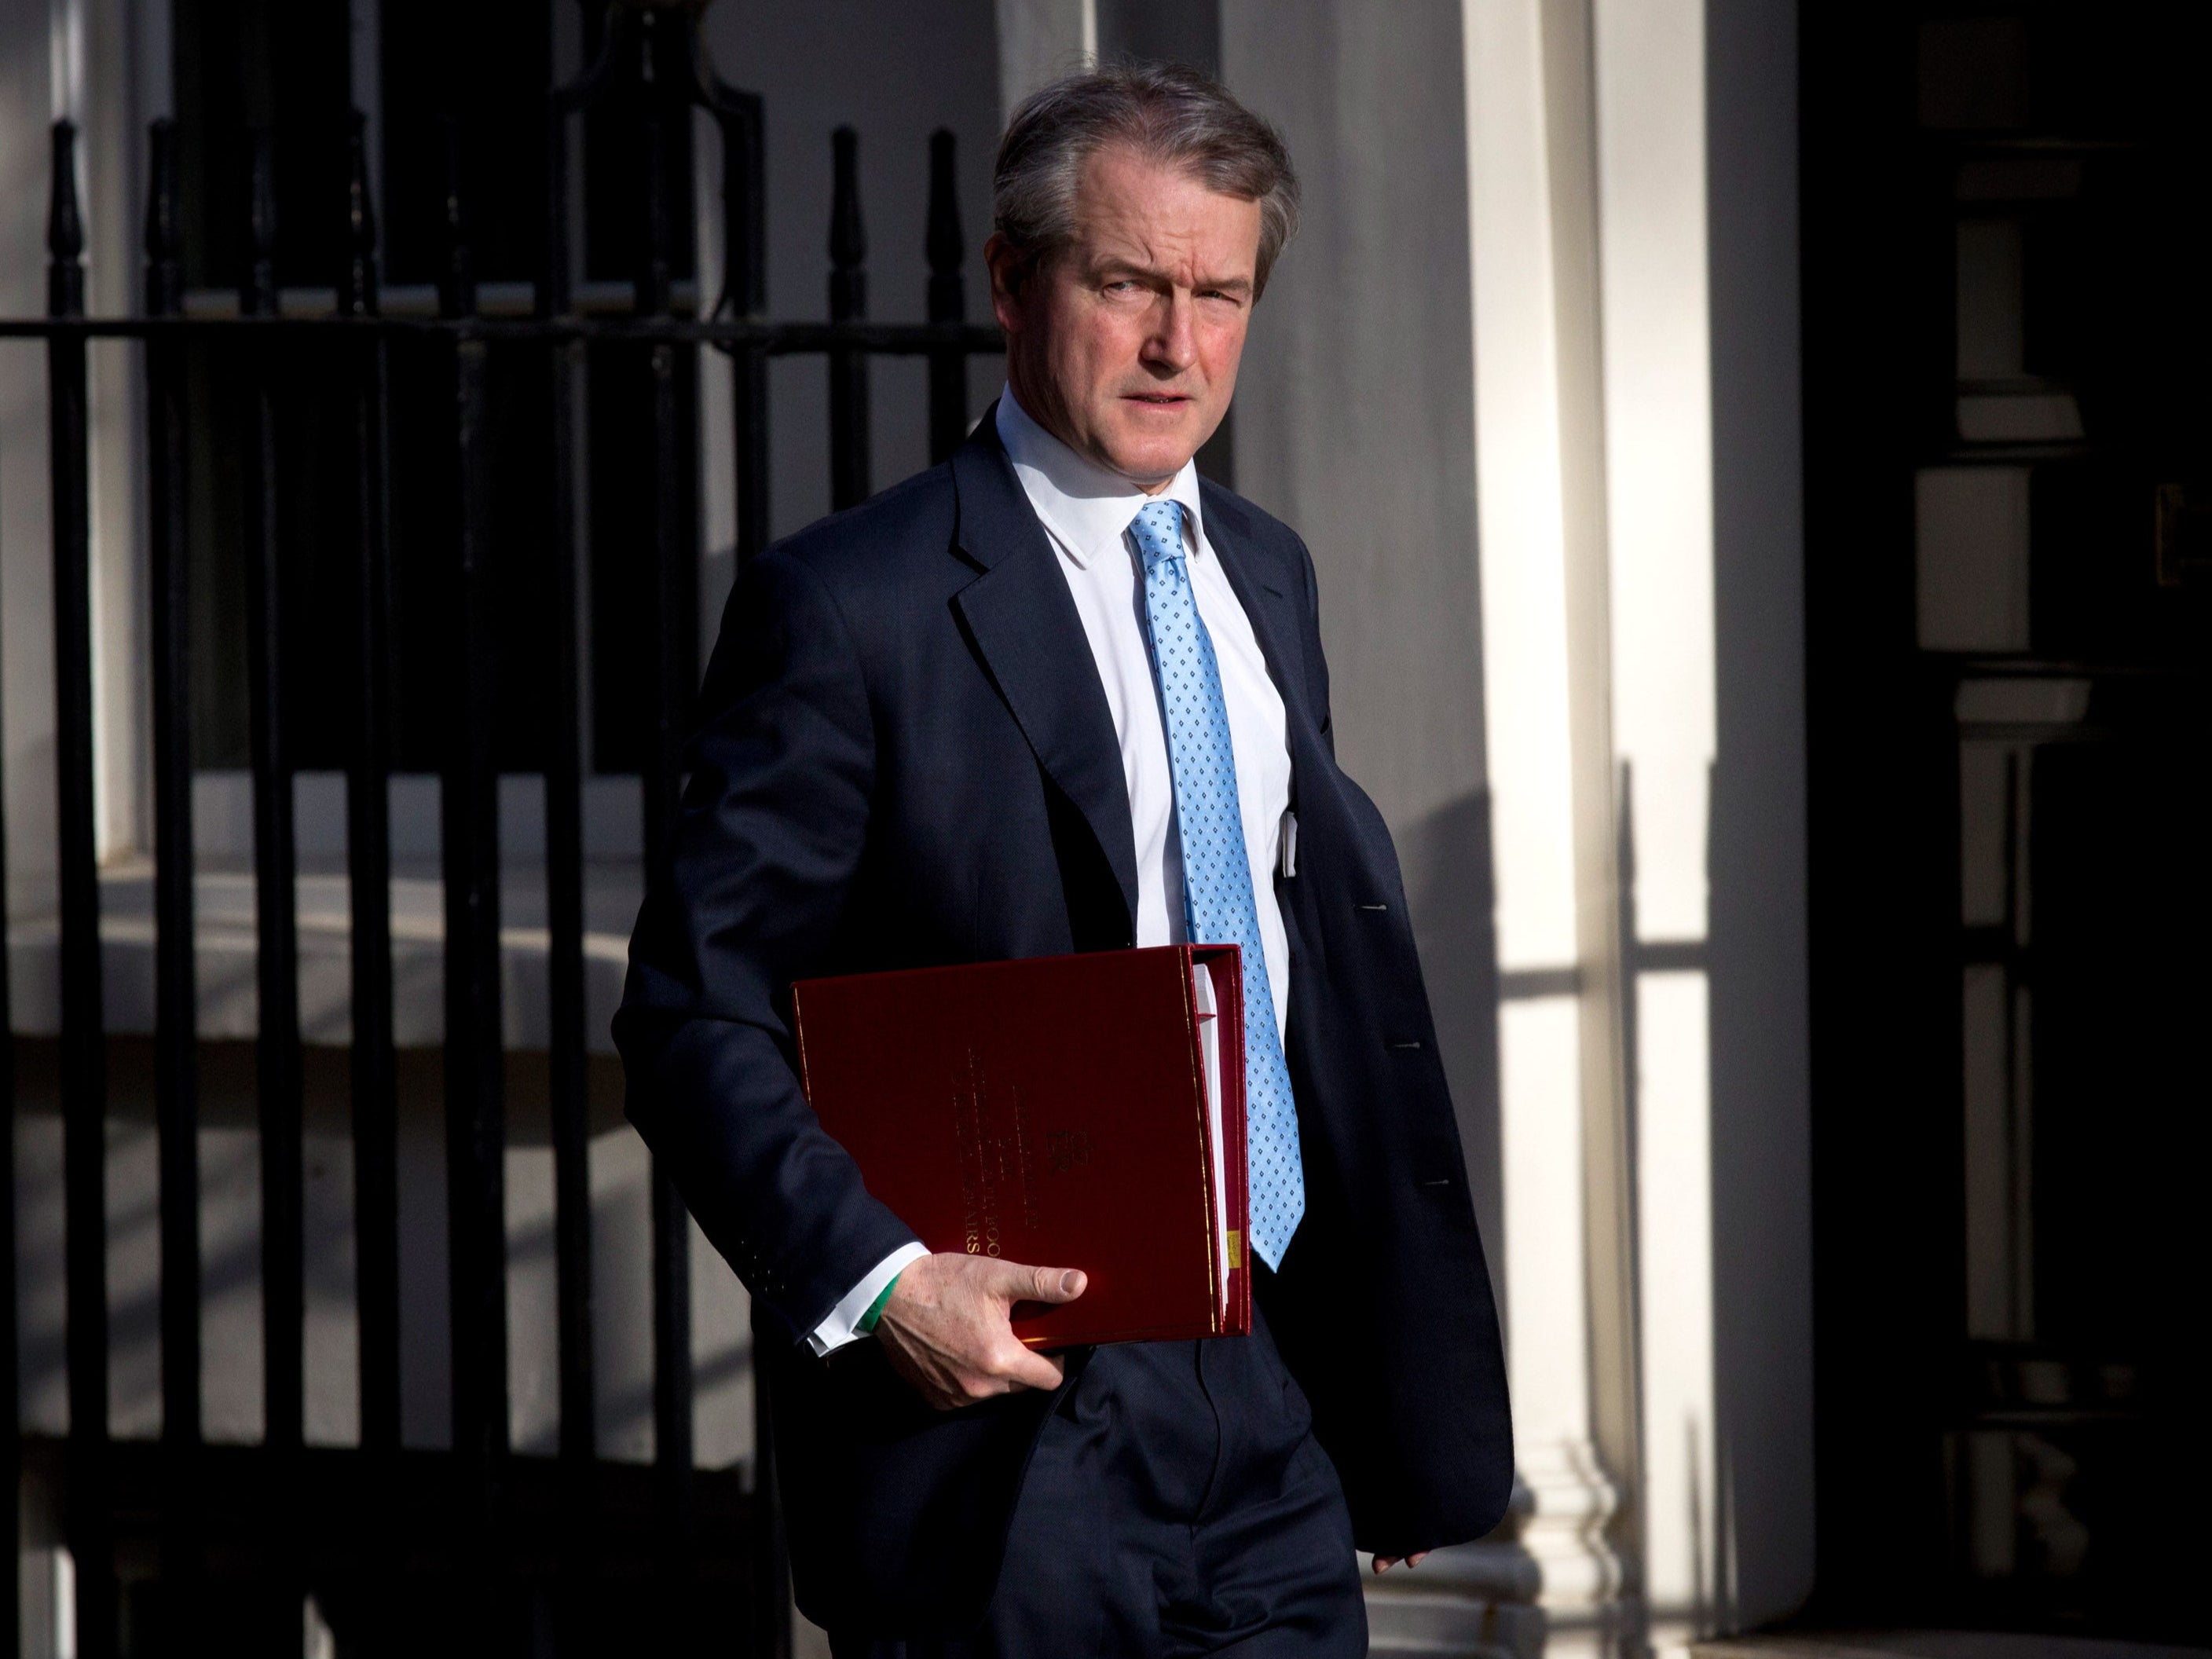 Owen Paterson was found to have breached lobbying rules